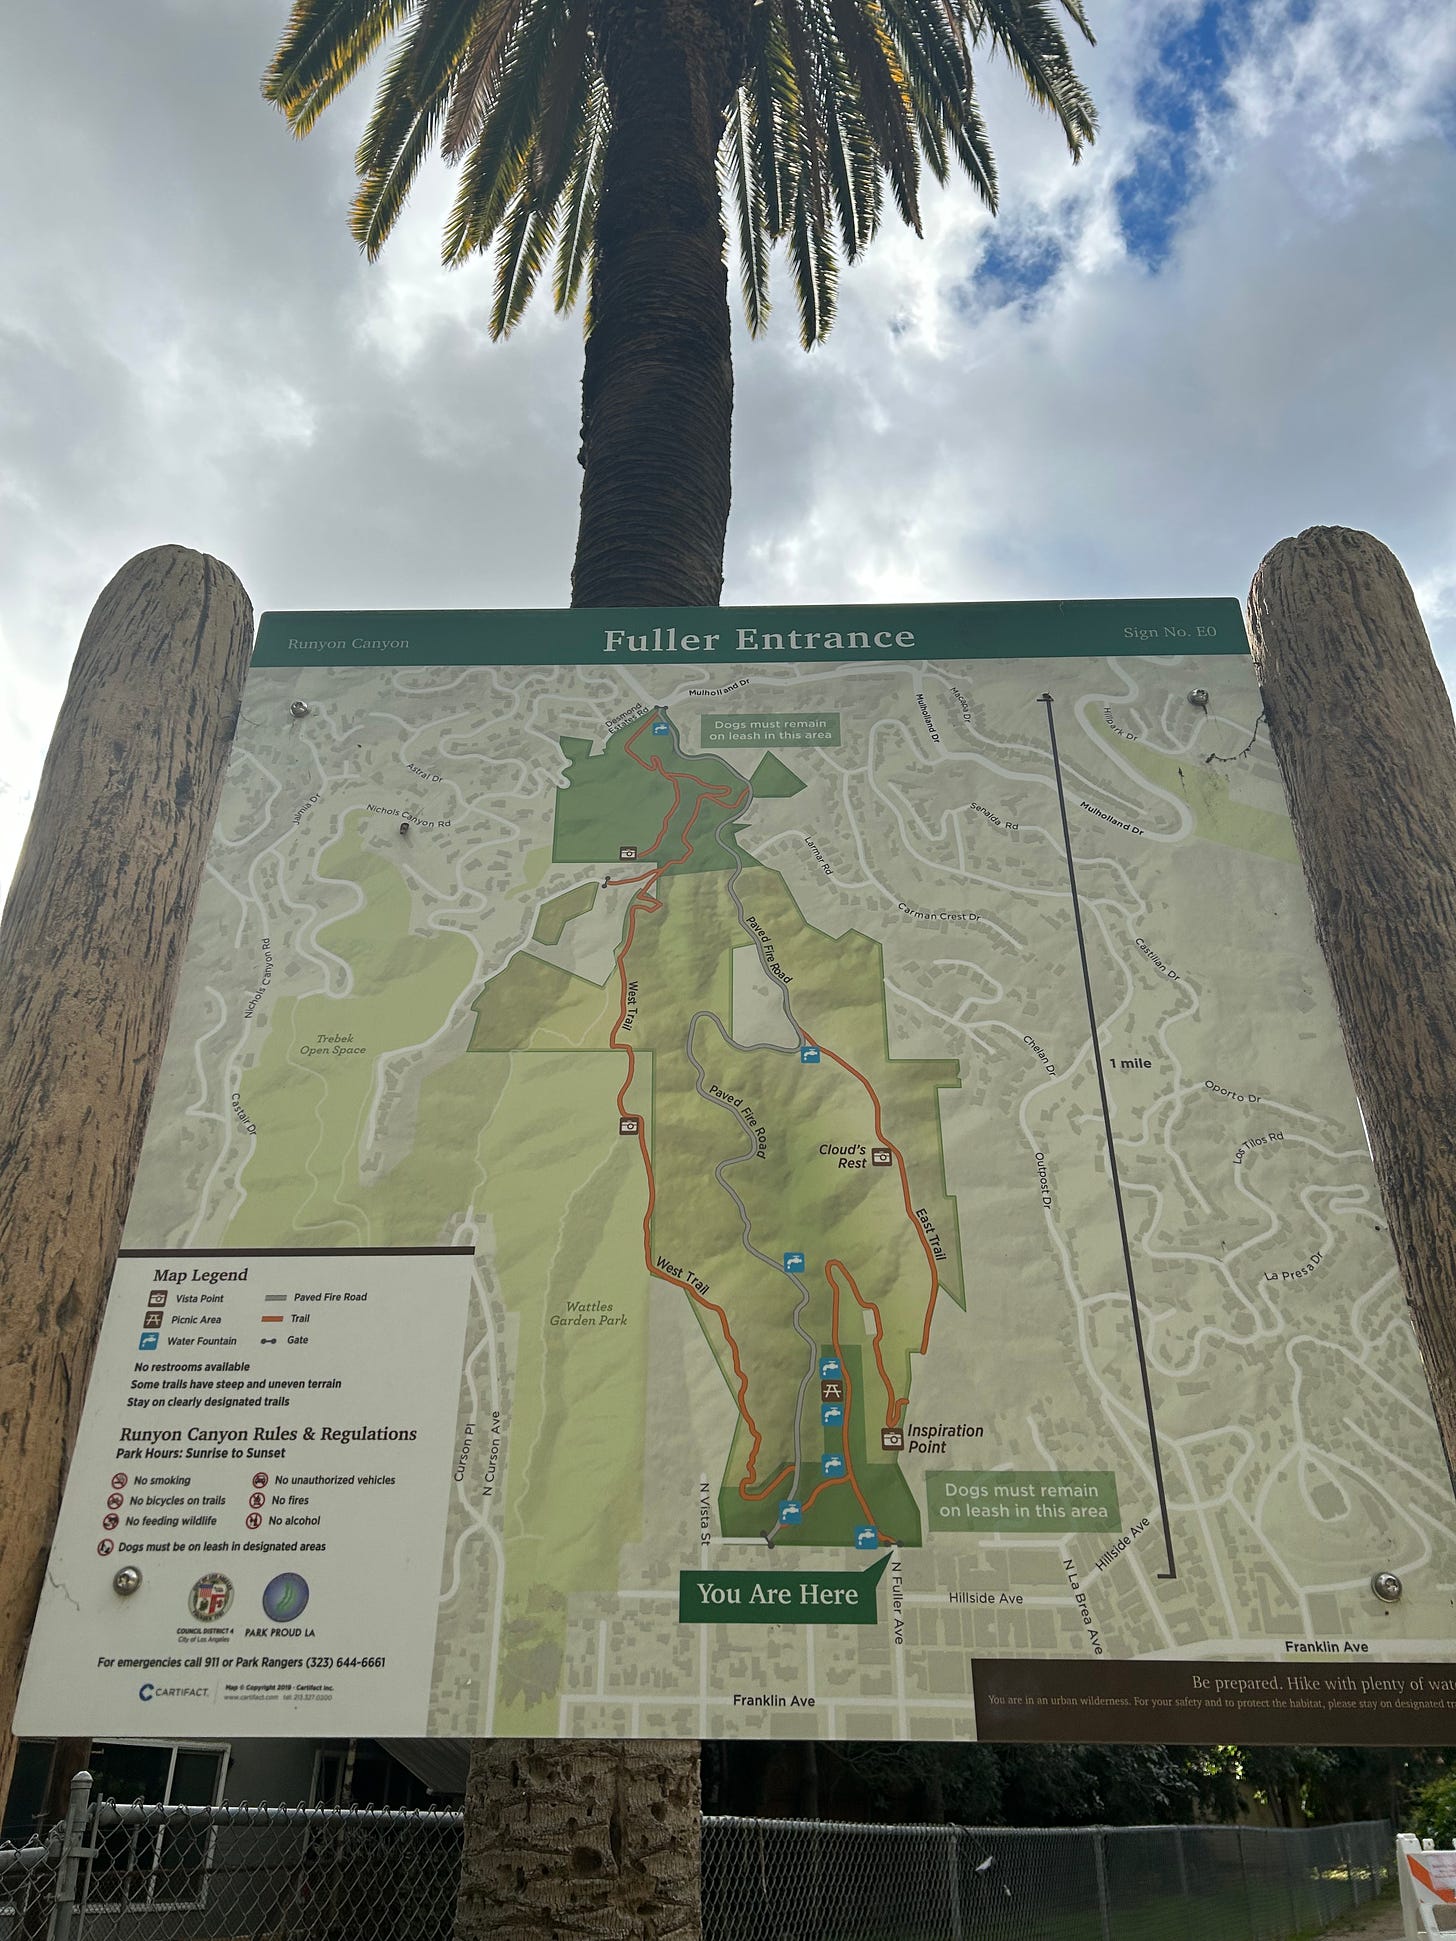 A map of the Fuller Entrance of Runyon Canyon on the signpost at the entrance of the park.